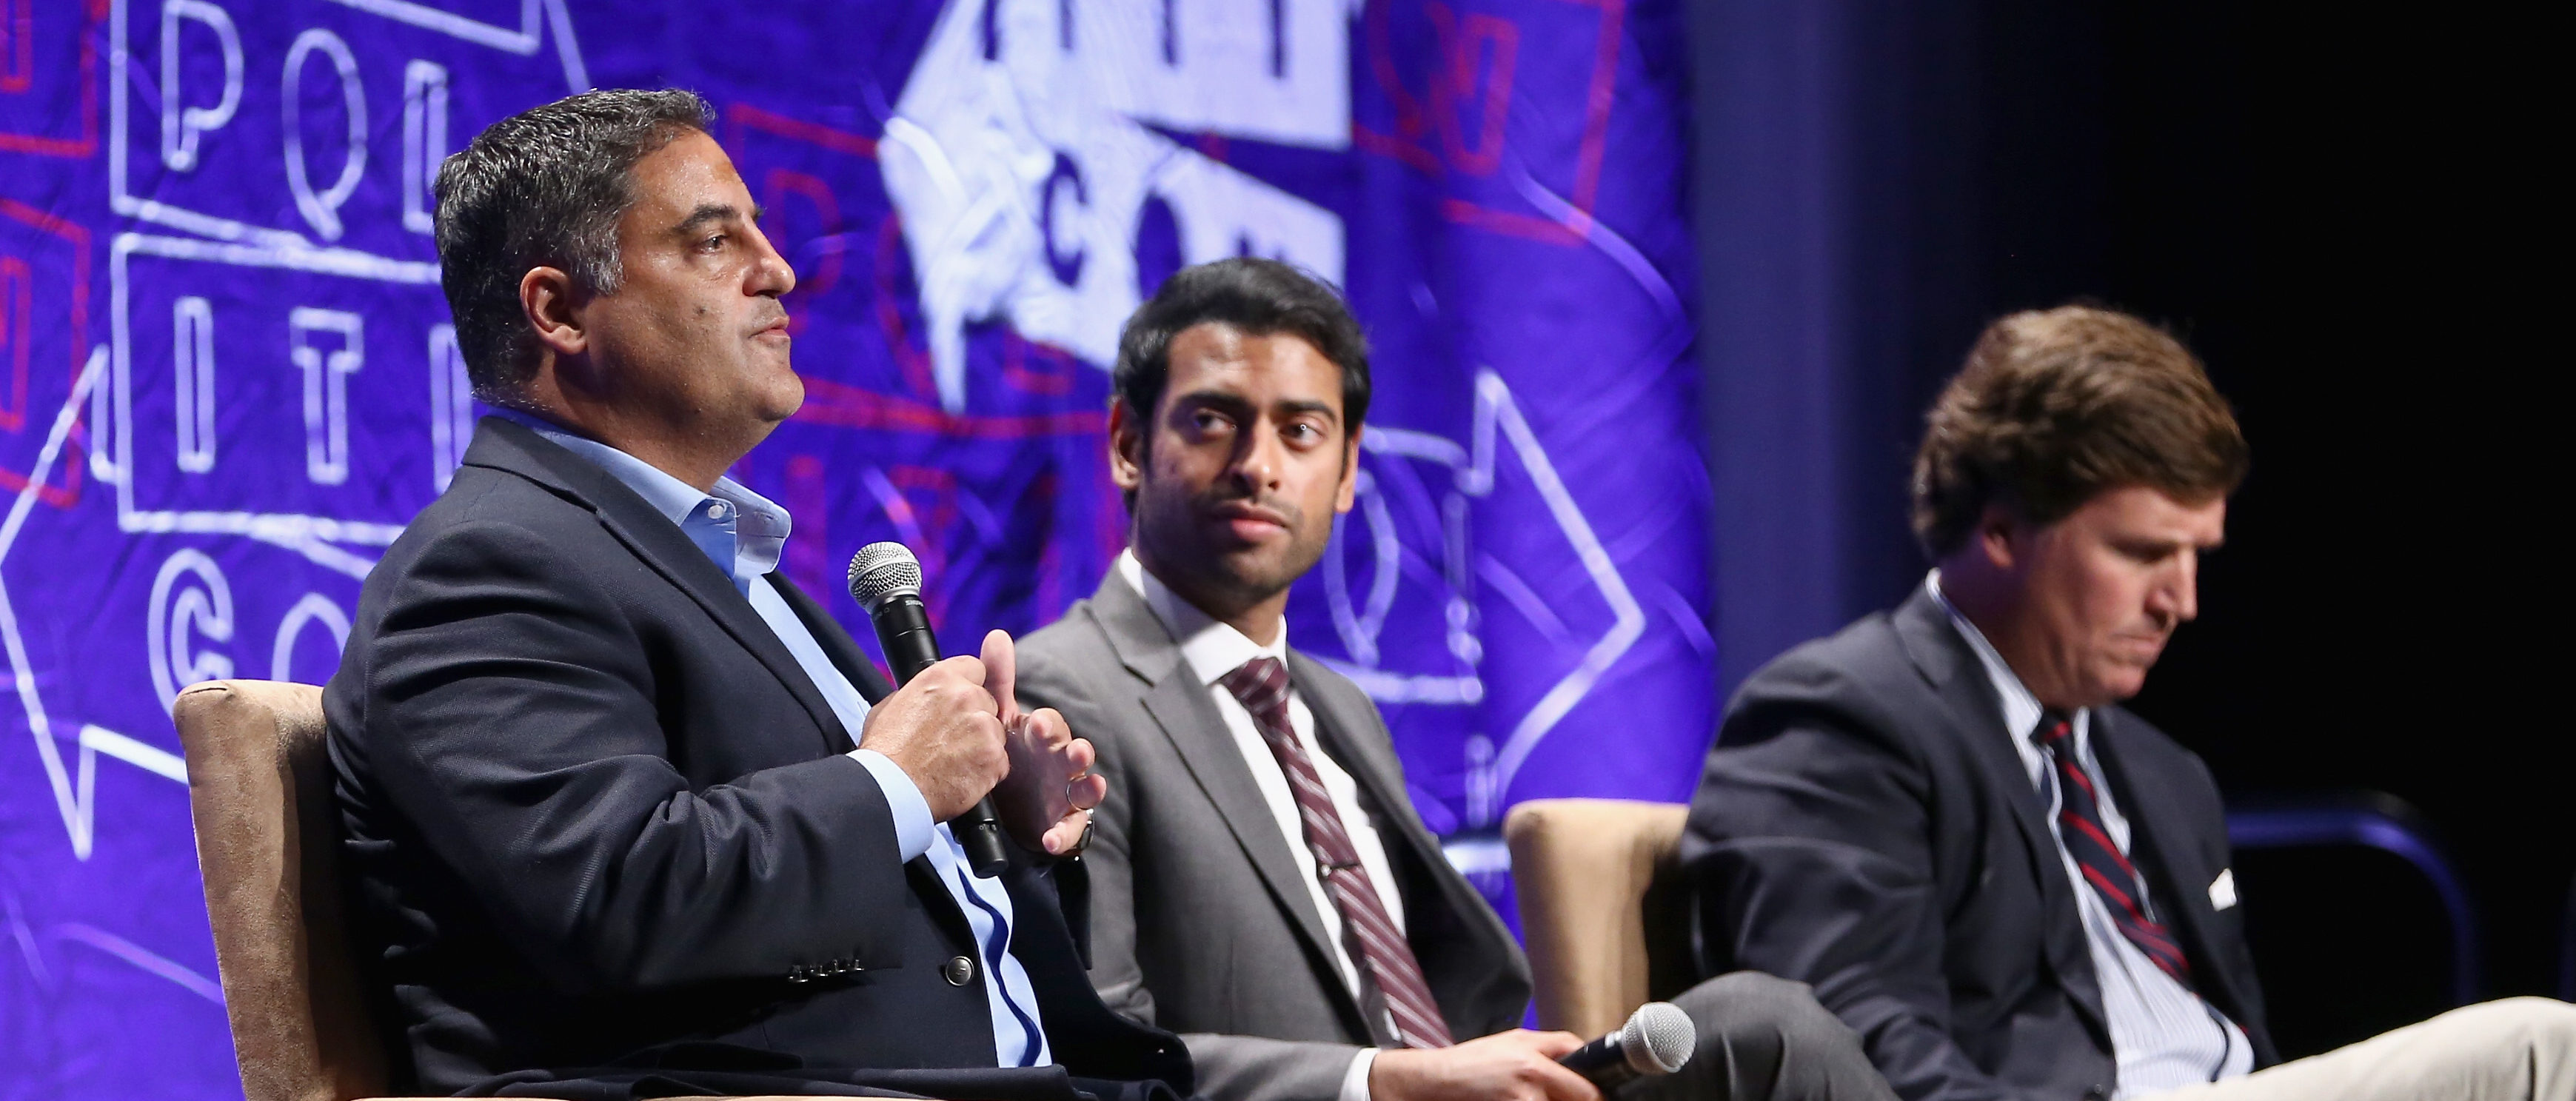 LOS ANGELES, CA - OCTOBER 21: (L-R) Cenk Uygur, Steven Olikara, and Tucker Carlson during Politicon 2018 (Photo by Rich Polk/Getty Images for Politicon )